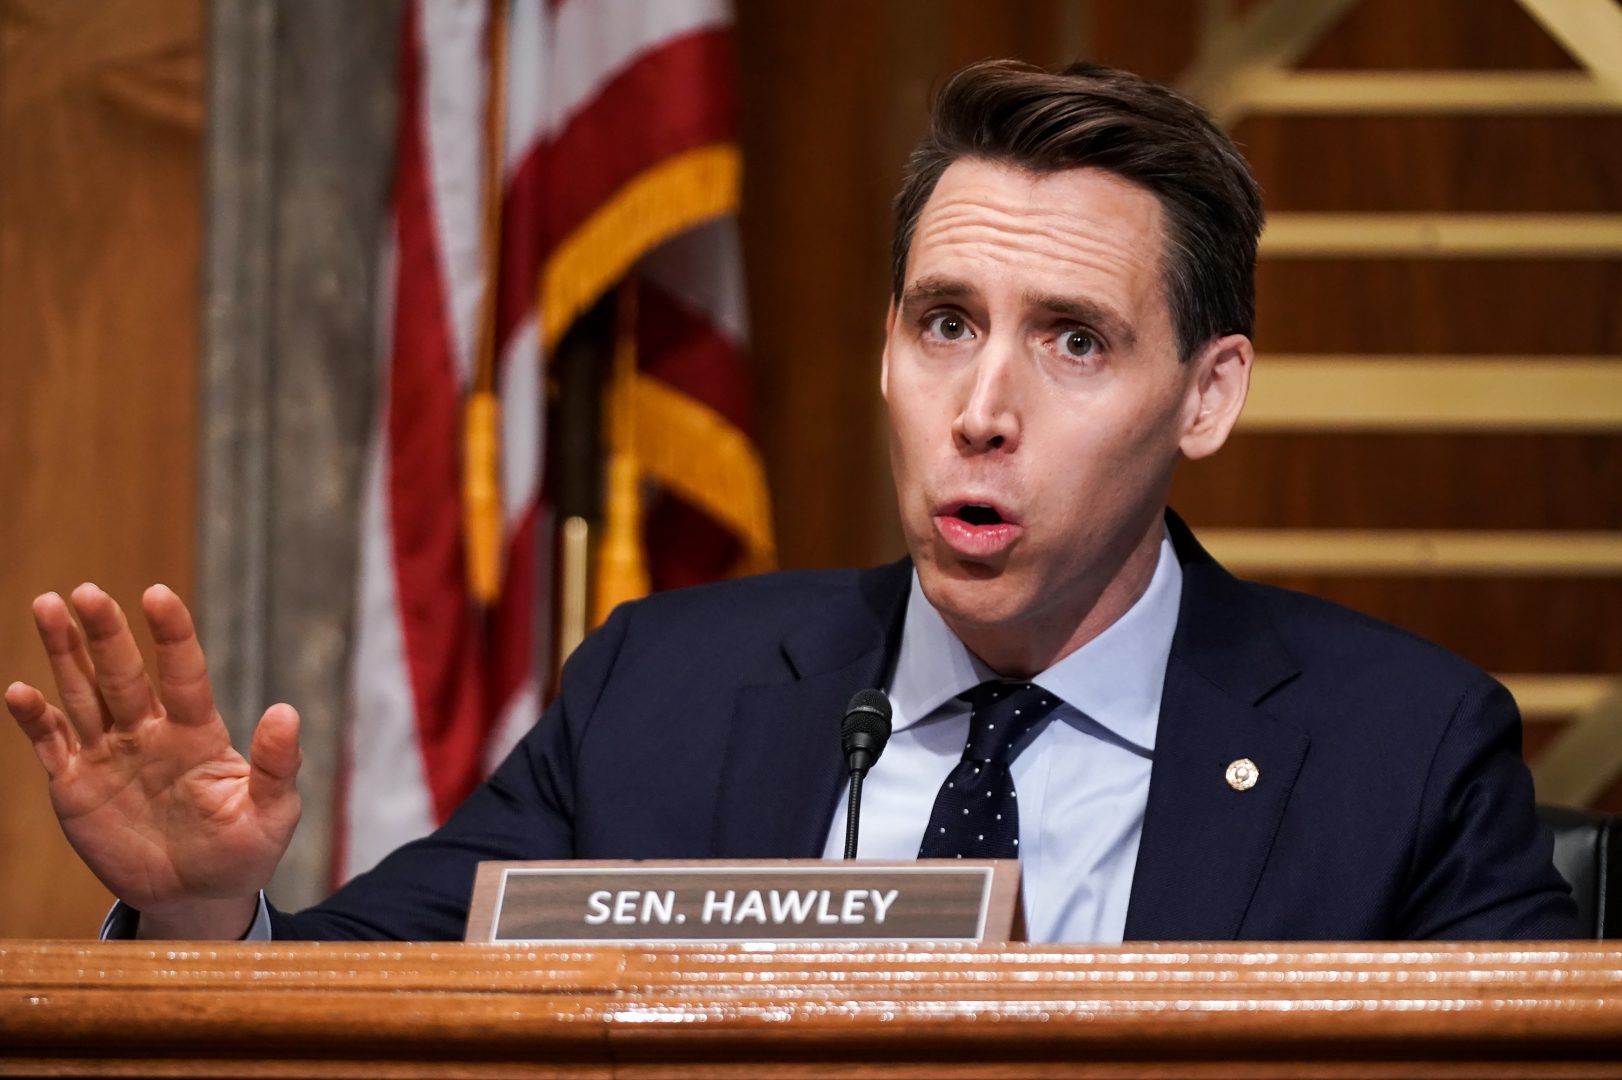 Sen. Josh Hawley, R-Mo., seen here during a Dec. 16 hearing, has said he plans to object to the certification of President-elect Joe Biden's victory during the joint session of Congress on Jan. 6.